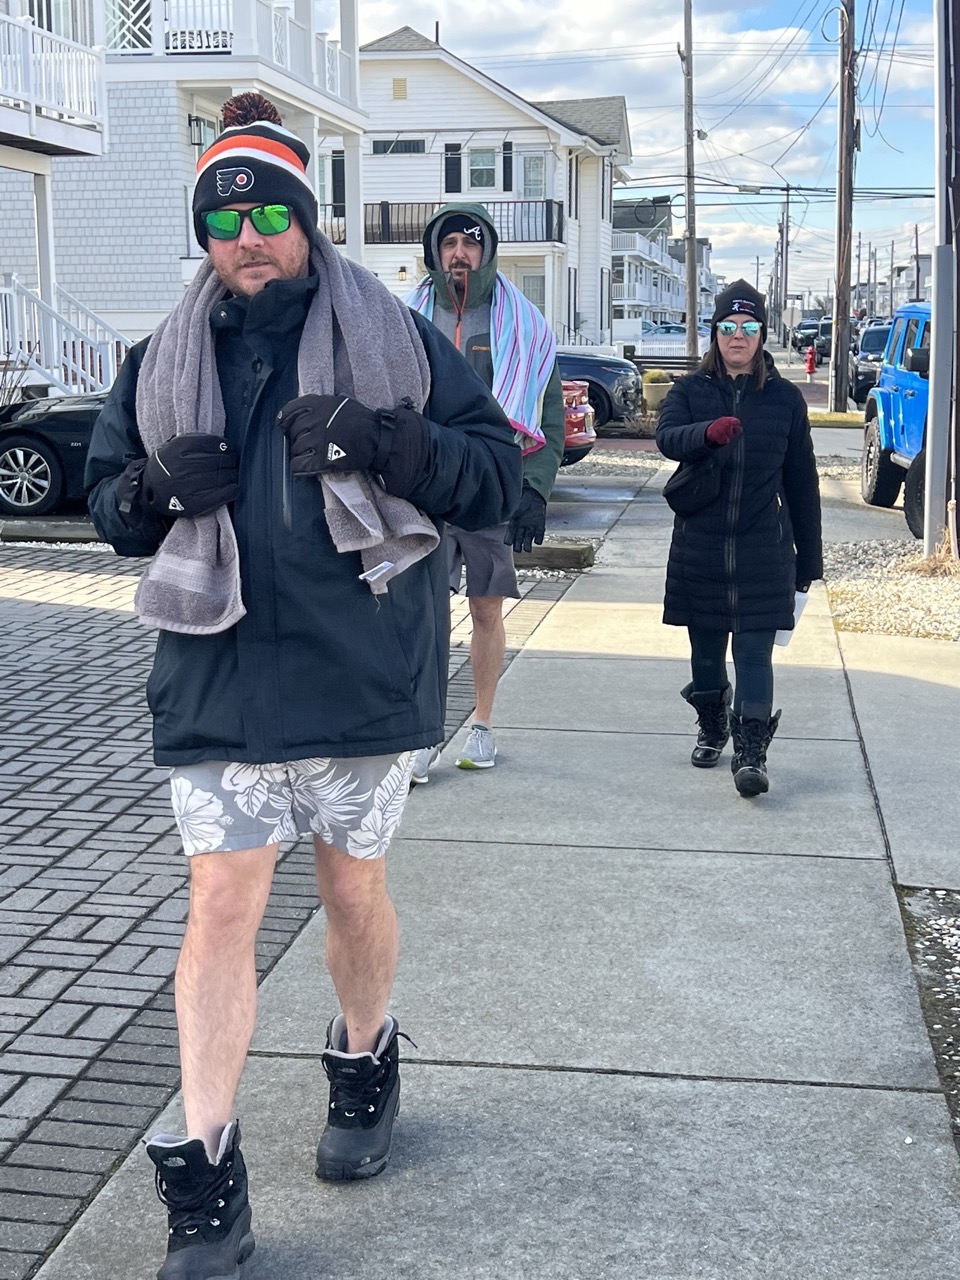 Polar Plunge weekend: Dry and walking to the beach